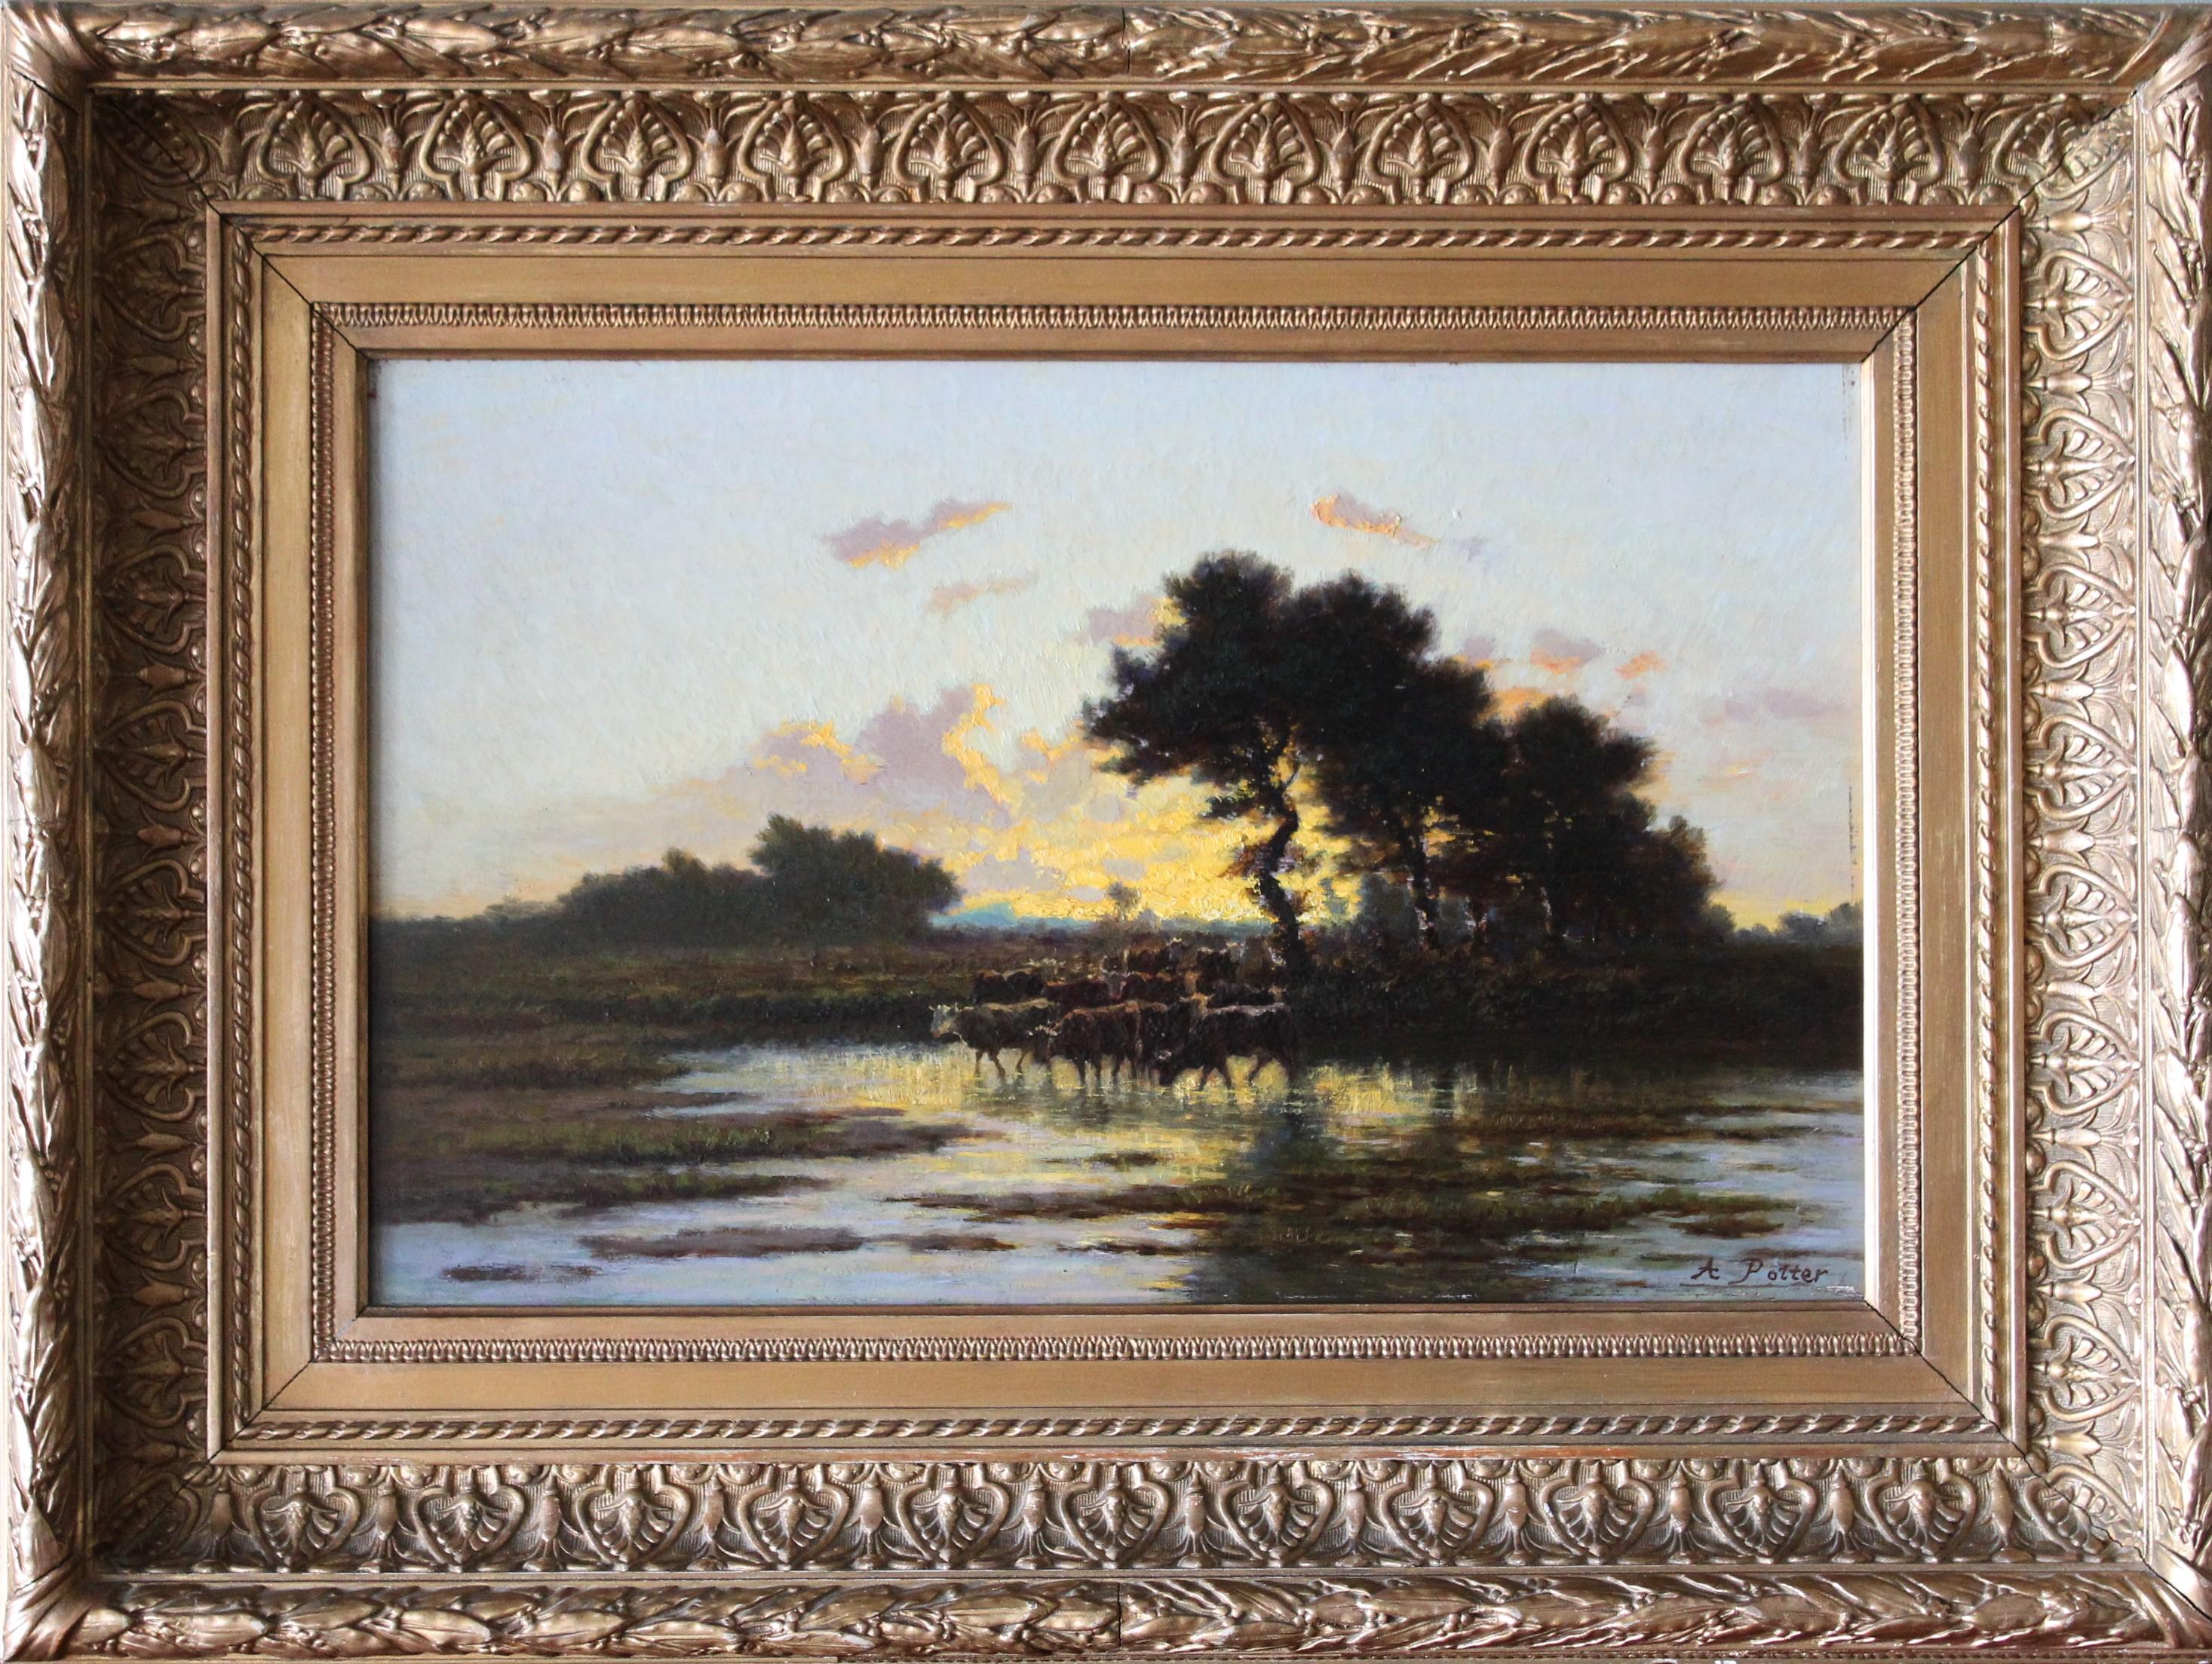 Les Vaches by Adolphe Potter (1835-1911)

Antique countryside sunset oil painting with cows on wood, signed in the bottom right Adople Potte (1835-1911).  This distinctive oil painting on smooth board in an old frame clearly demonstrates the